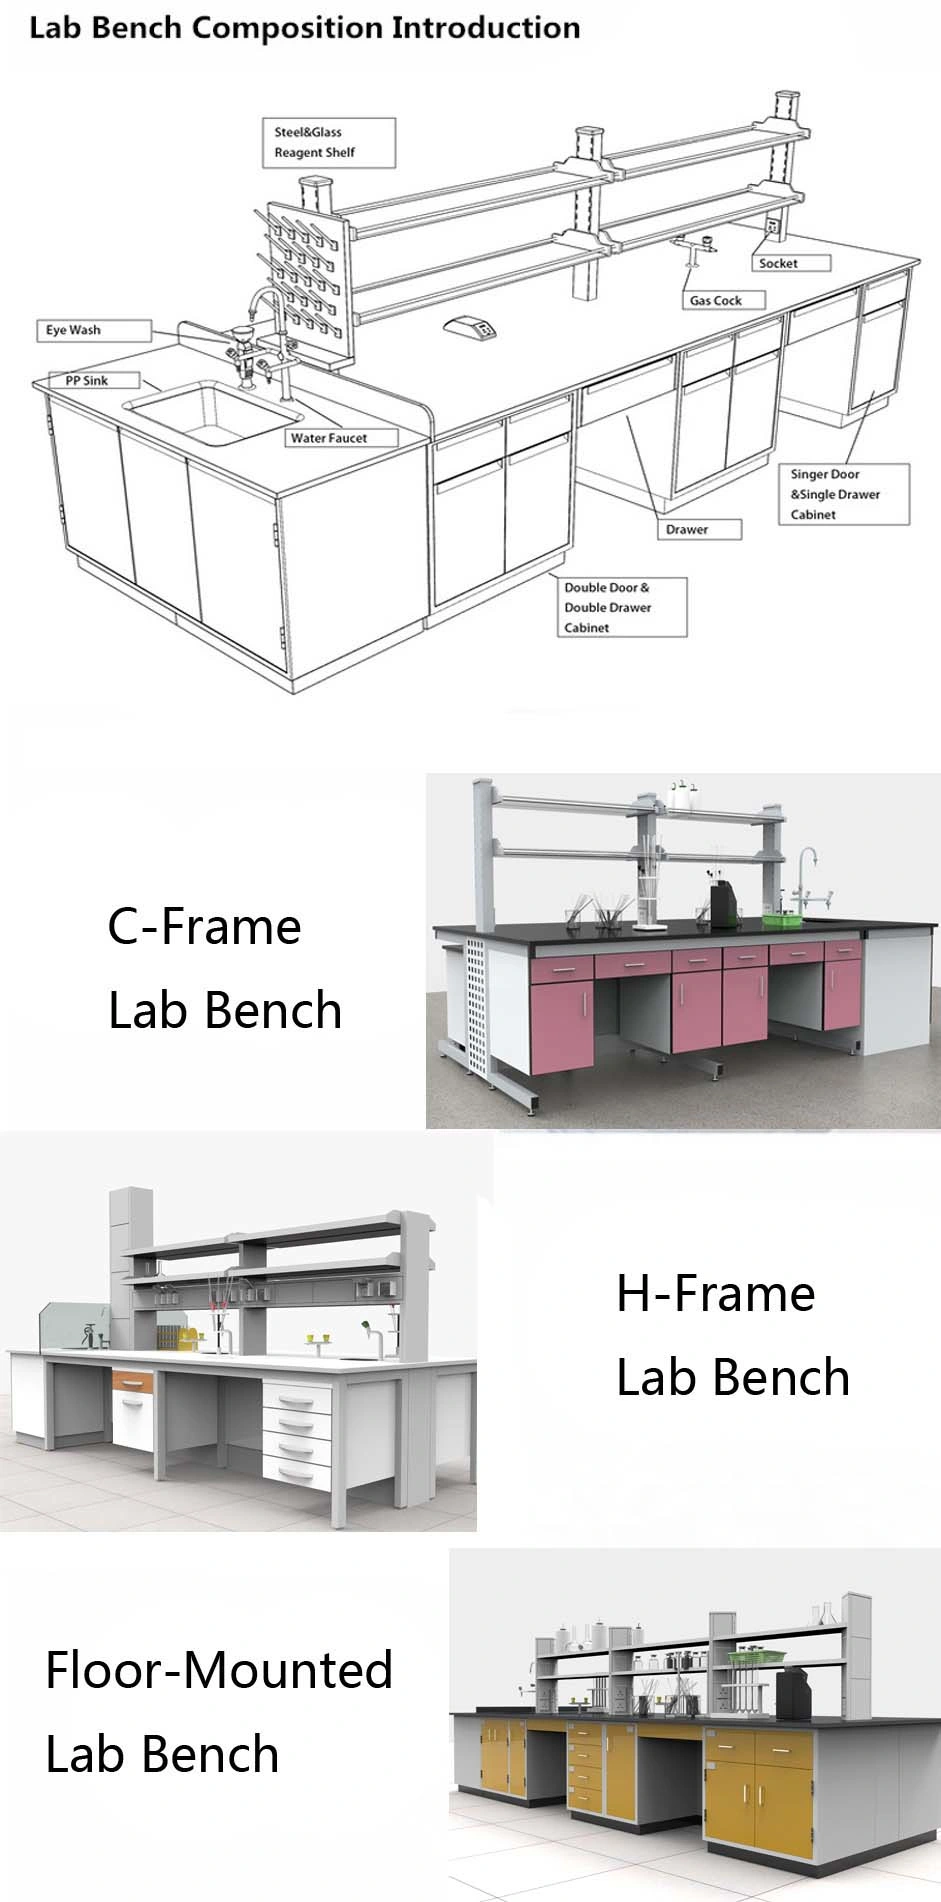 High Quality Customized Hospital School Chemistry Laboratory All Steel Island Work Bench with Drawers/